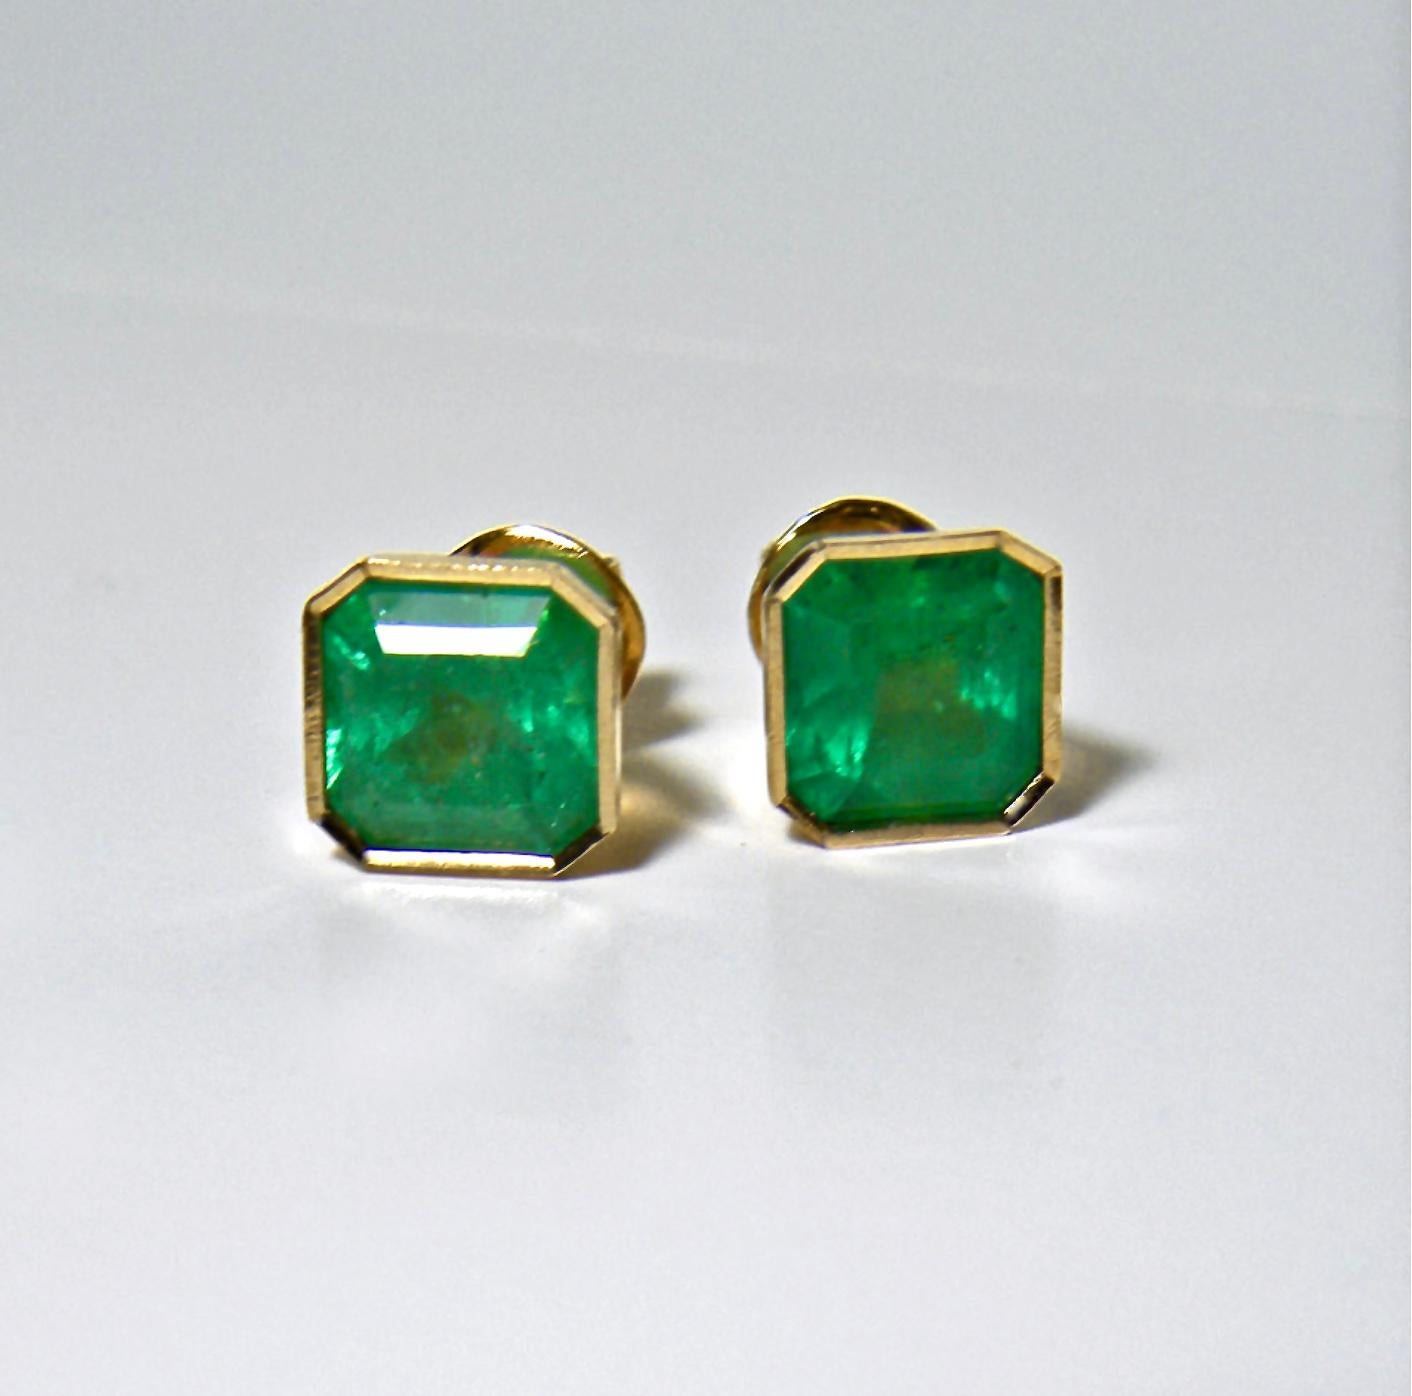 Gorgeous medium intense green color Colombian emeralds with very good clarity, square stud earrings. The Total Weight of both Emeralds is 4.82 carats. 
Total earrings weigh 4.4 grams,  18K yellow gold
Studs/ Bezel set / Push backs 
Comments: